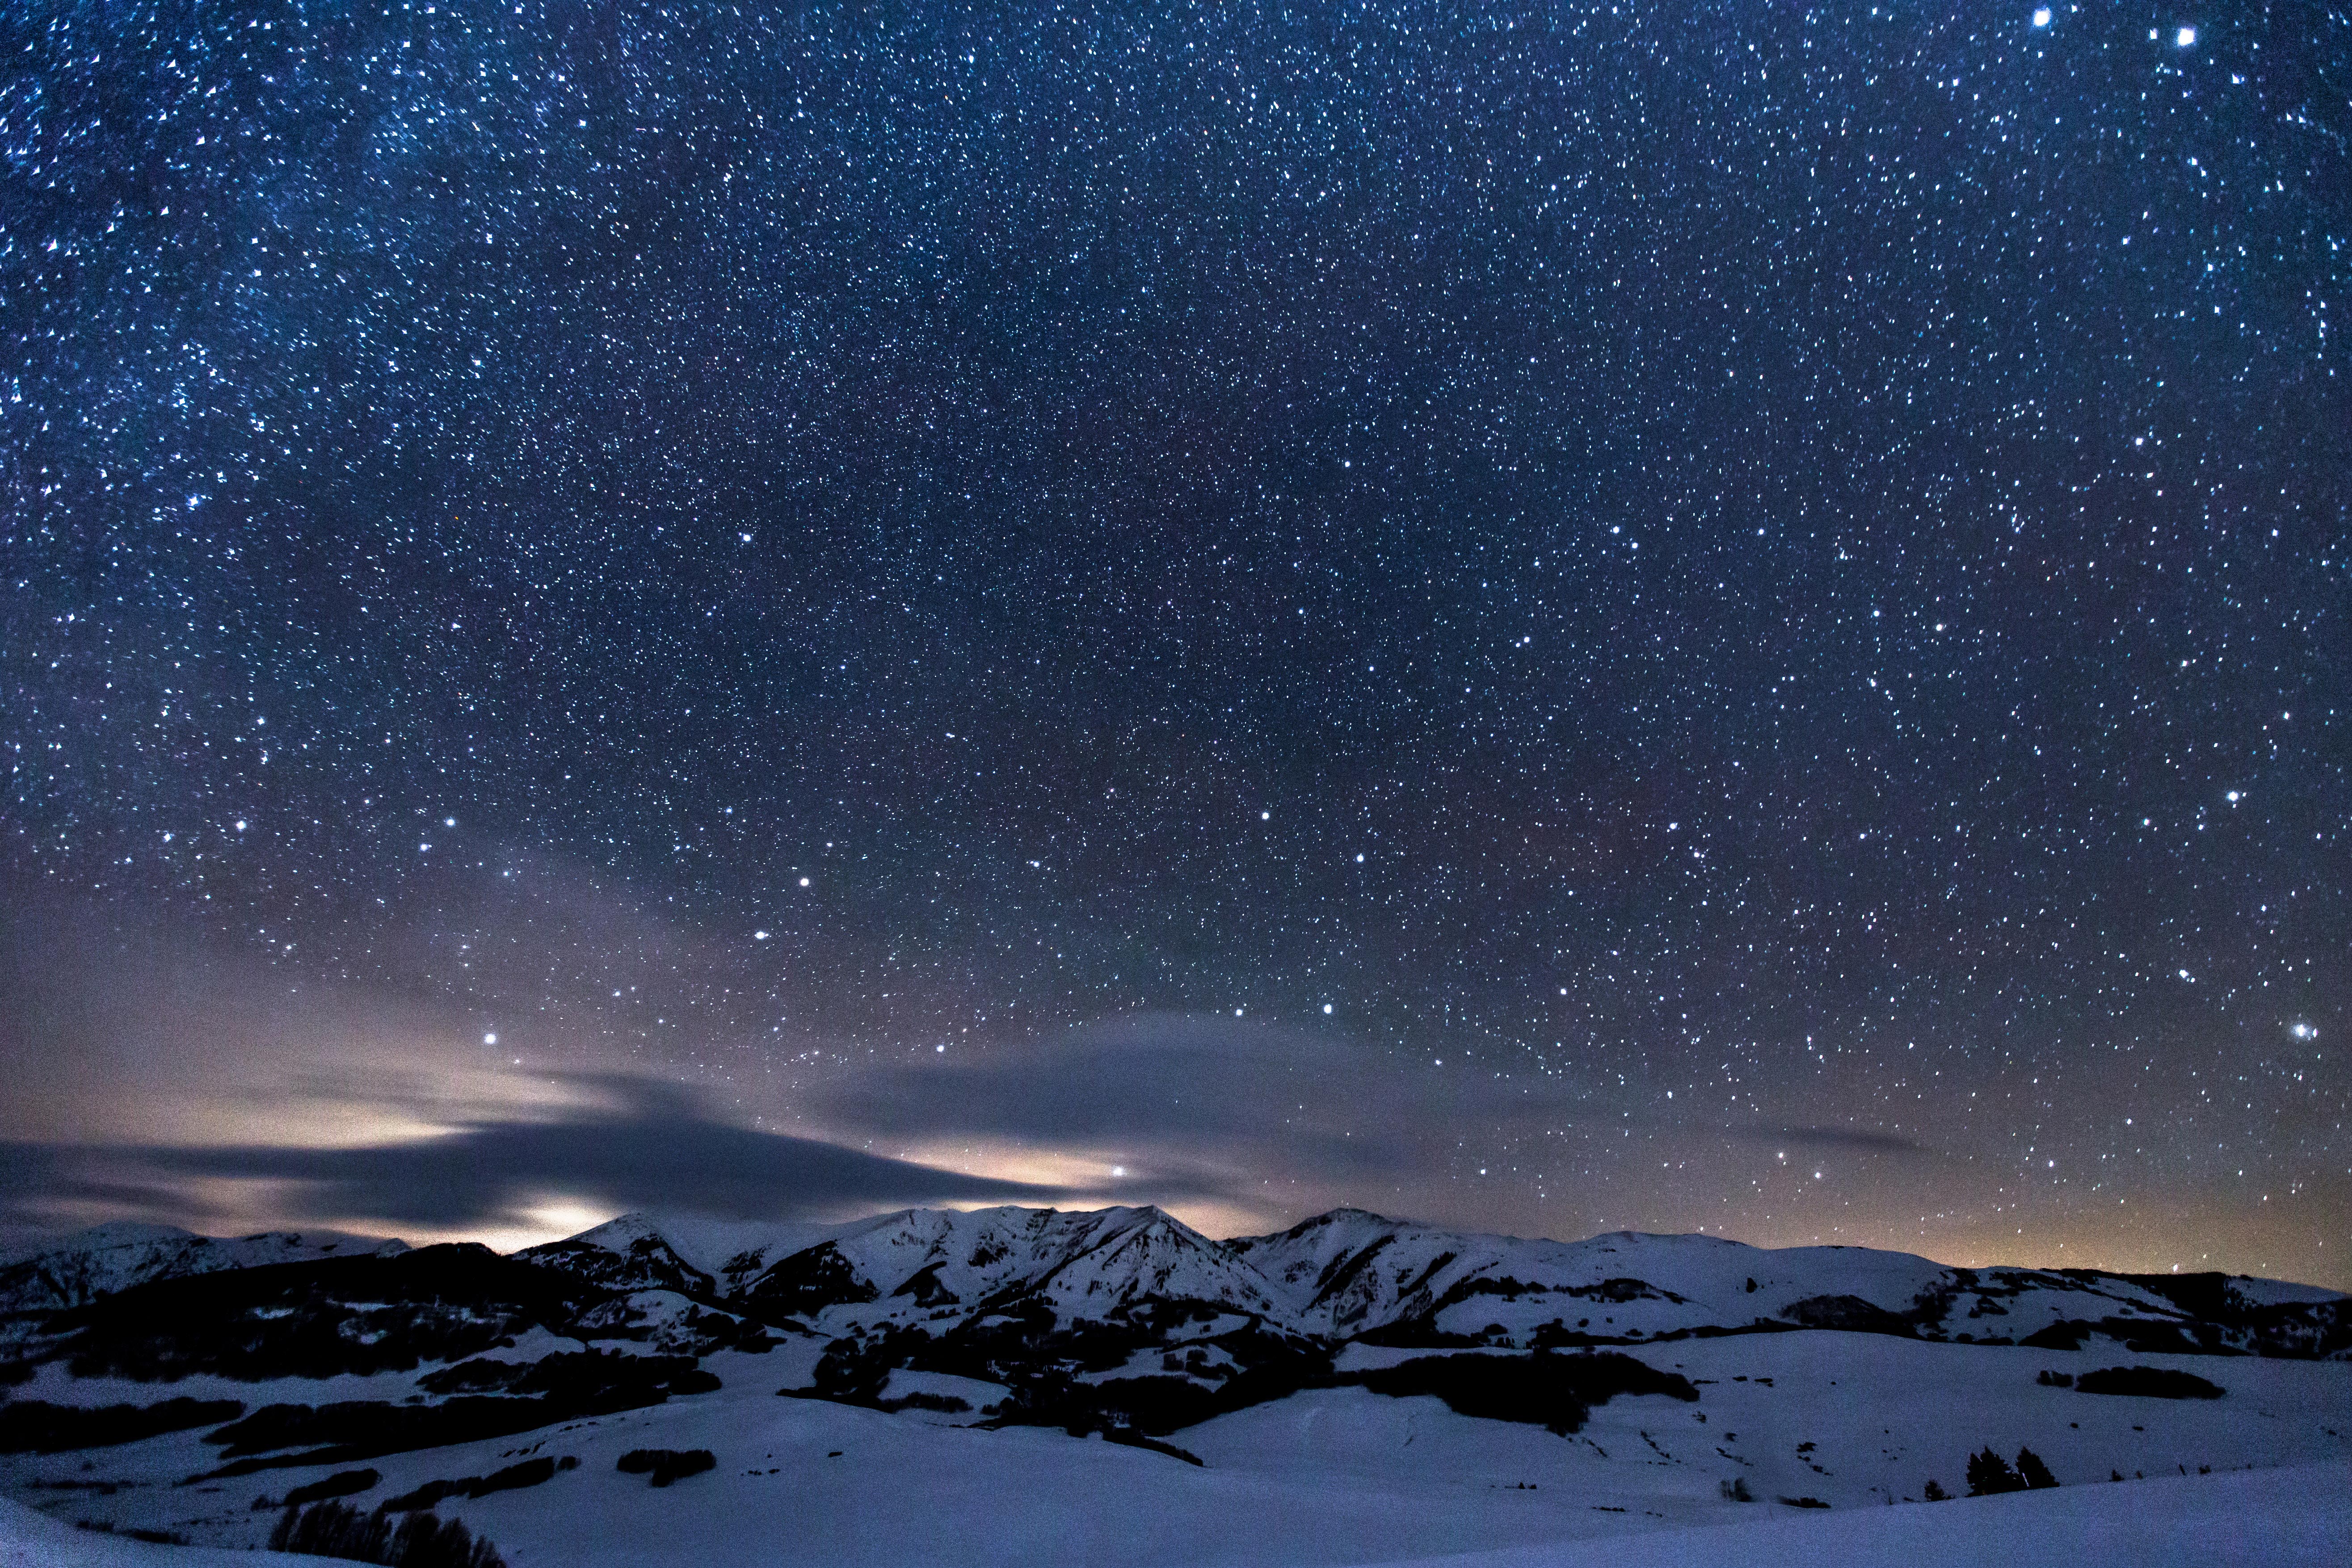 Evening starry sky over mountains covered with snow